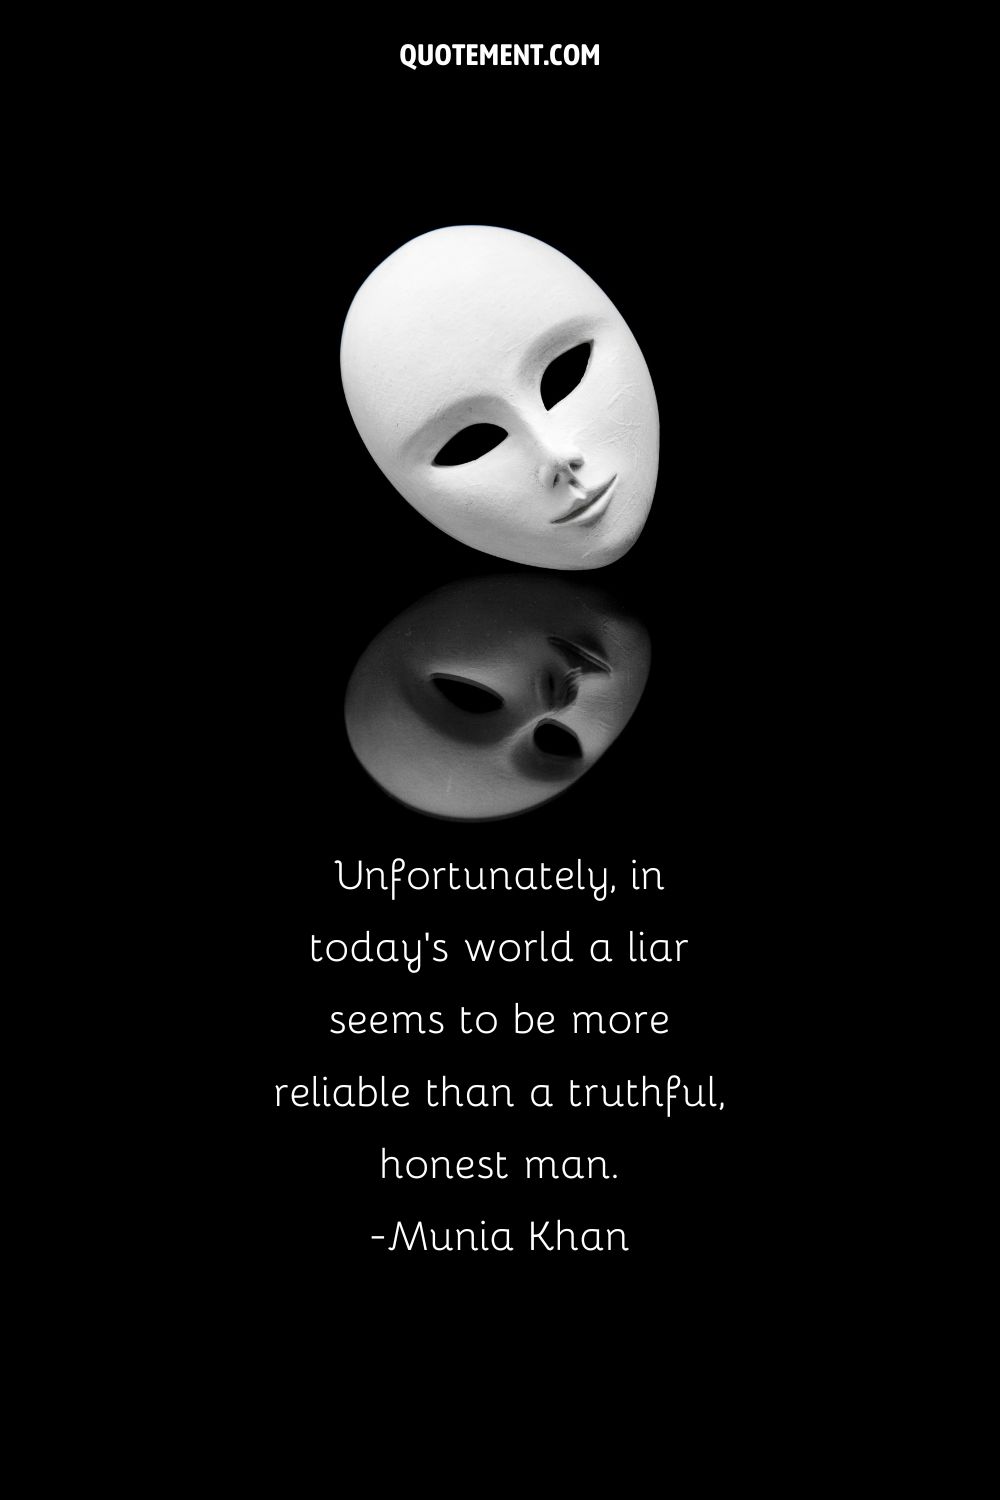 Unfortunately, in today’s world a liar seems to be more reliable than a truthful, honest man